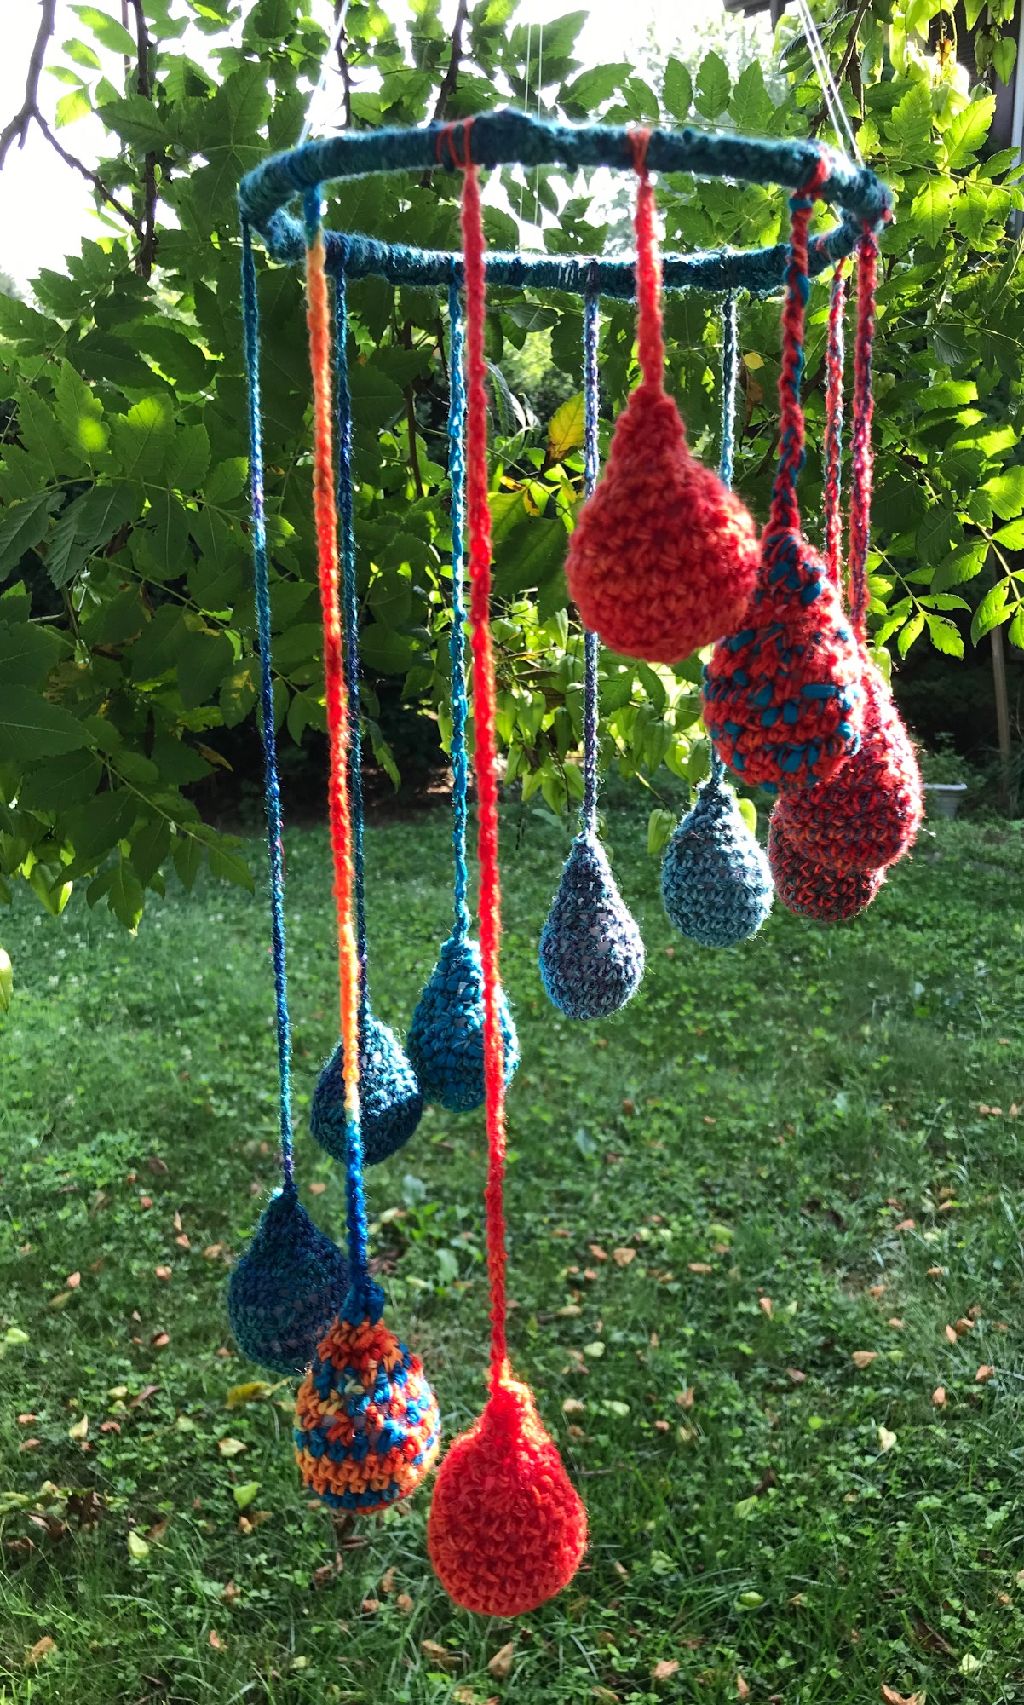 Hanging Mobile Raindrops Teardrops in Blues and Oranges